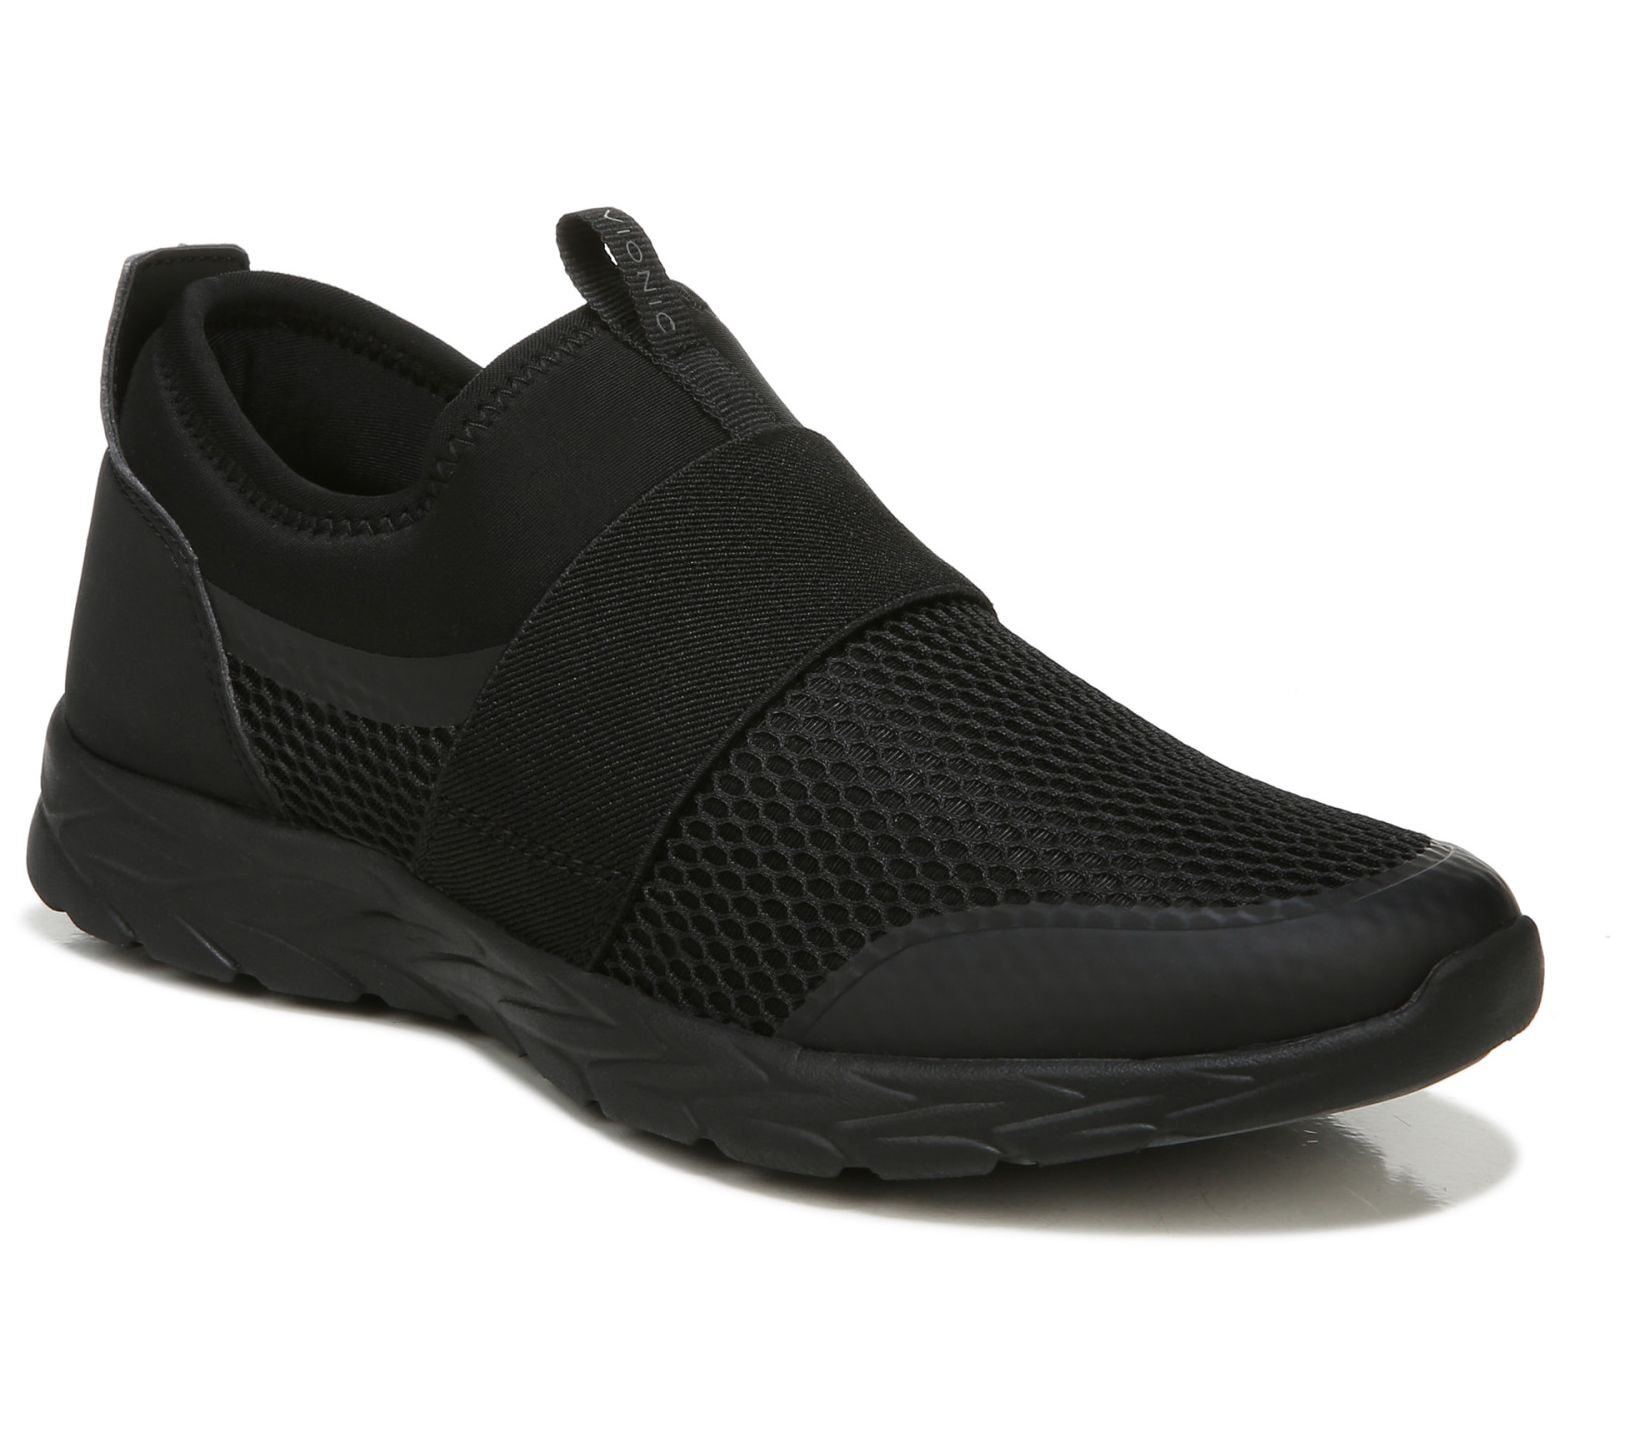 Vionic Slip-On Mesh Athletic Sneakers- Camrie - QVC.com